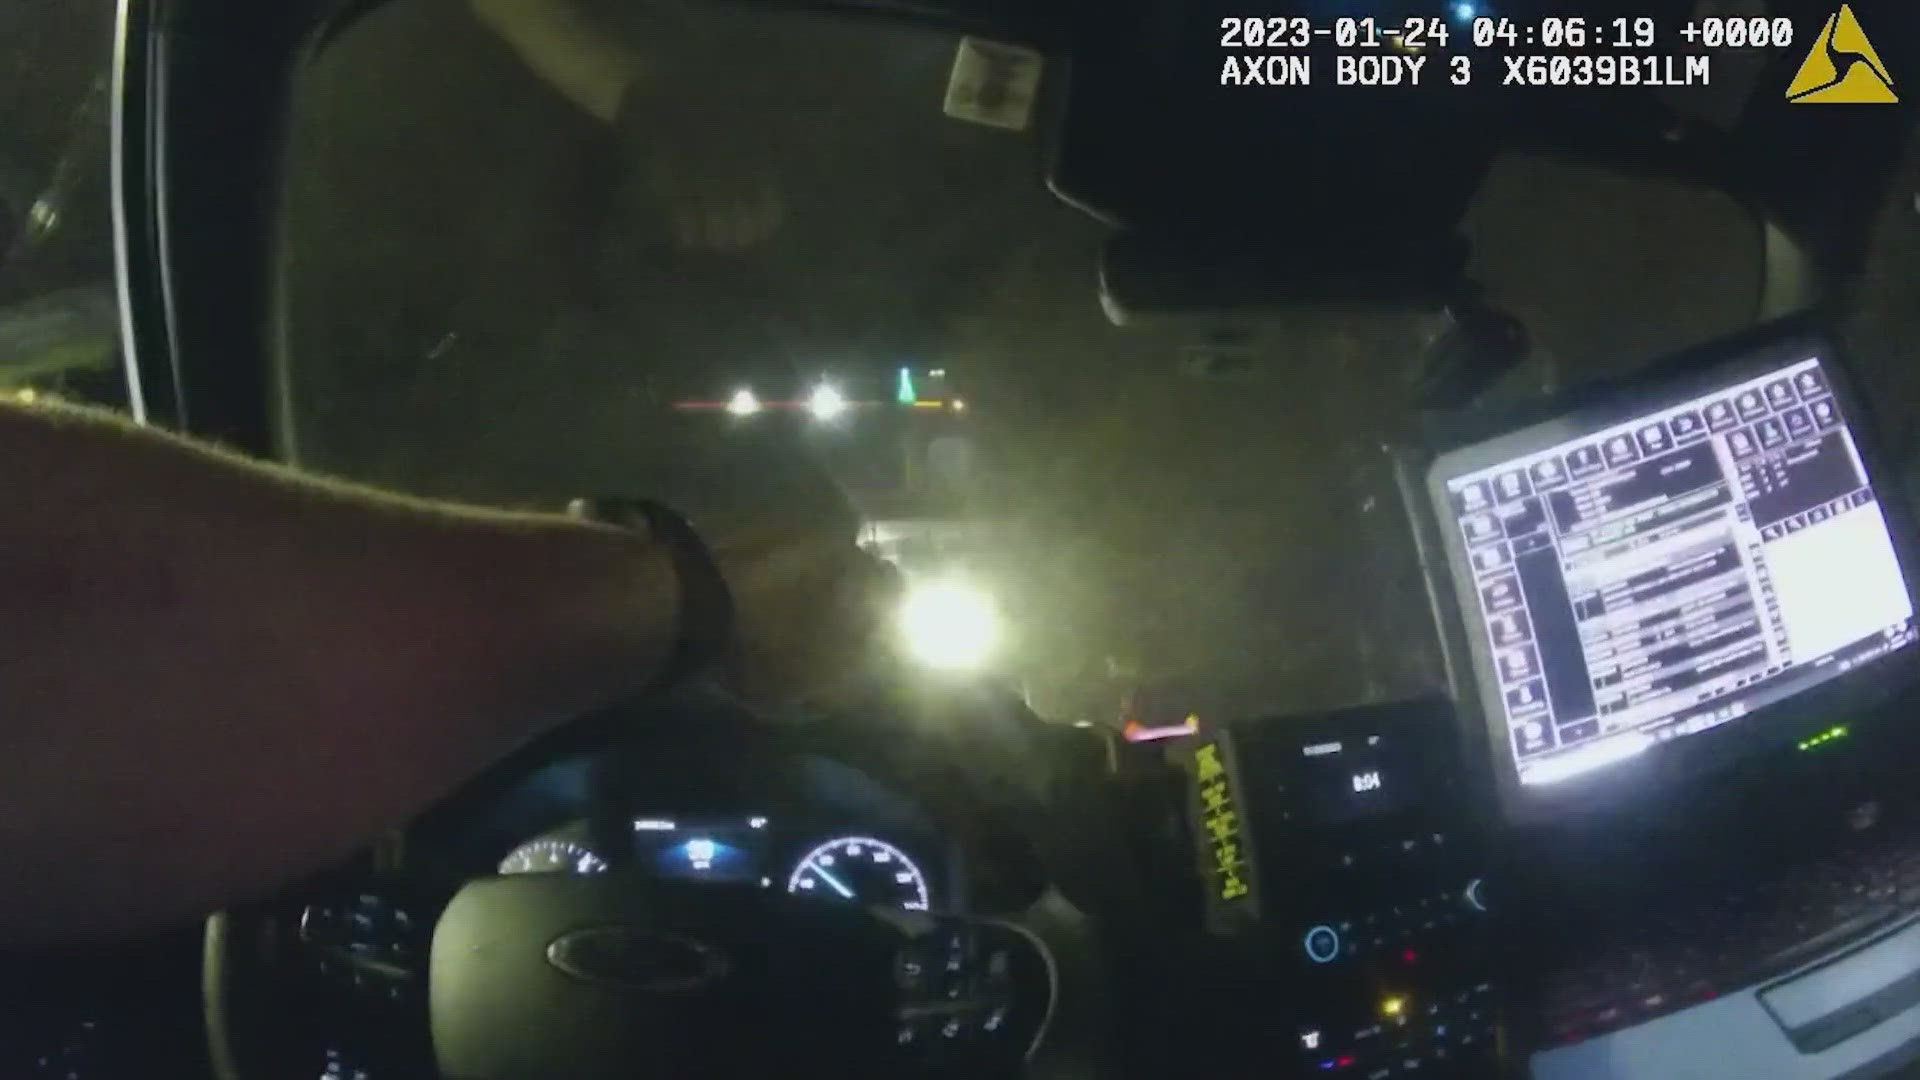 New body camera footage shows the fatal crash involving a pedestrian and a Seattle police officer at the intersection of Dexter Ave and Thomas St. on January 24th